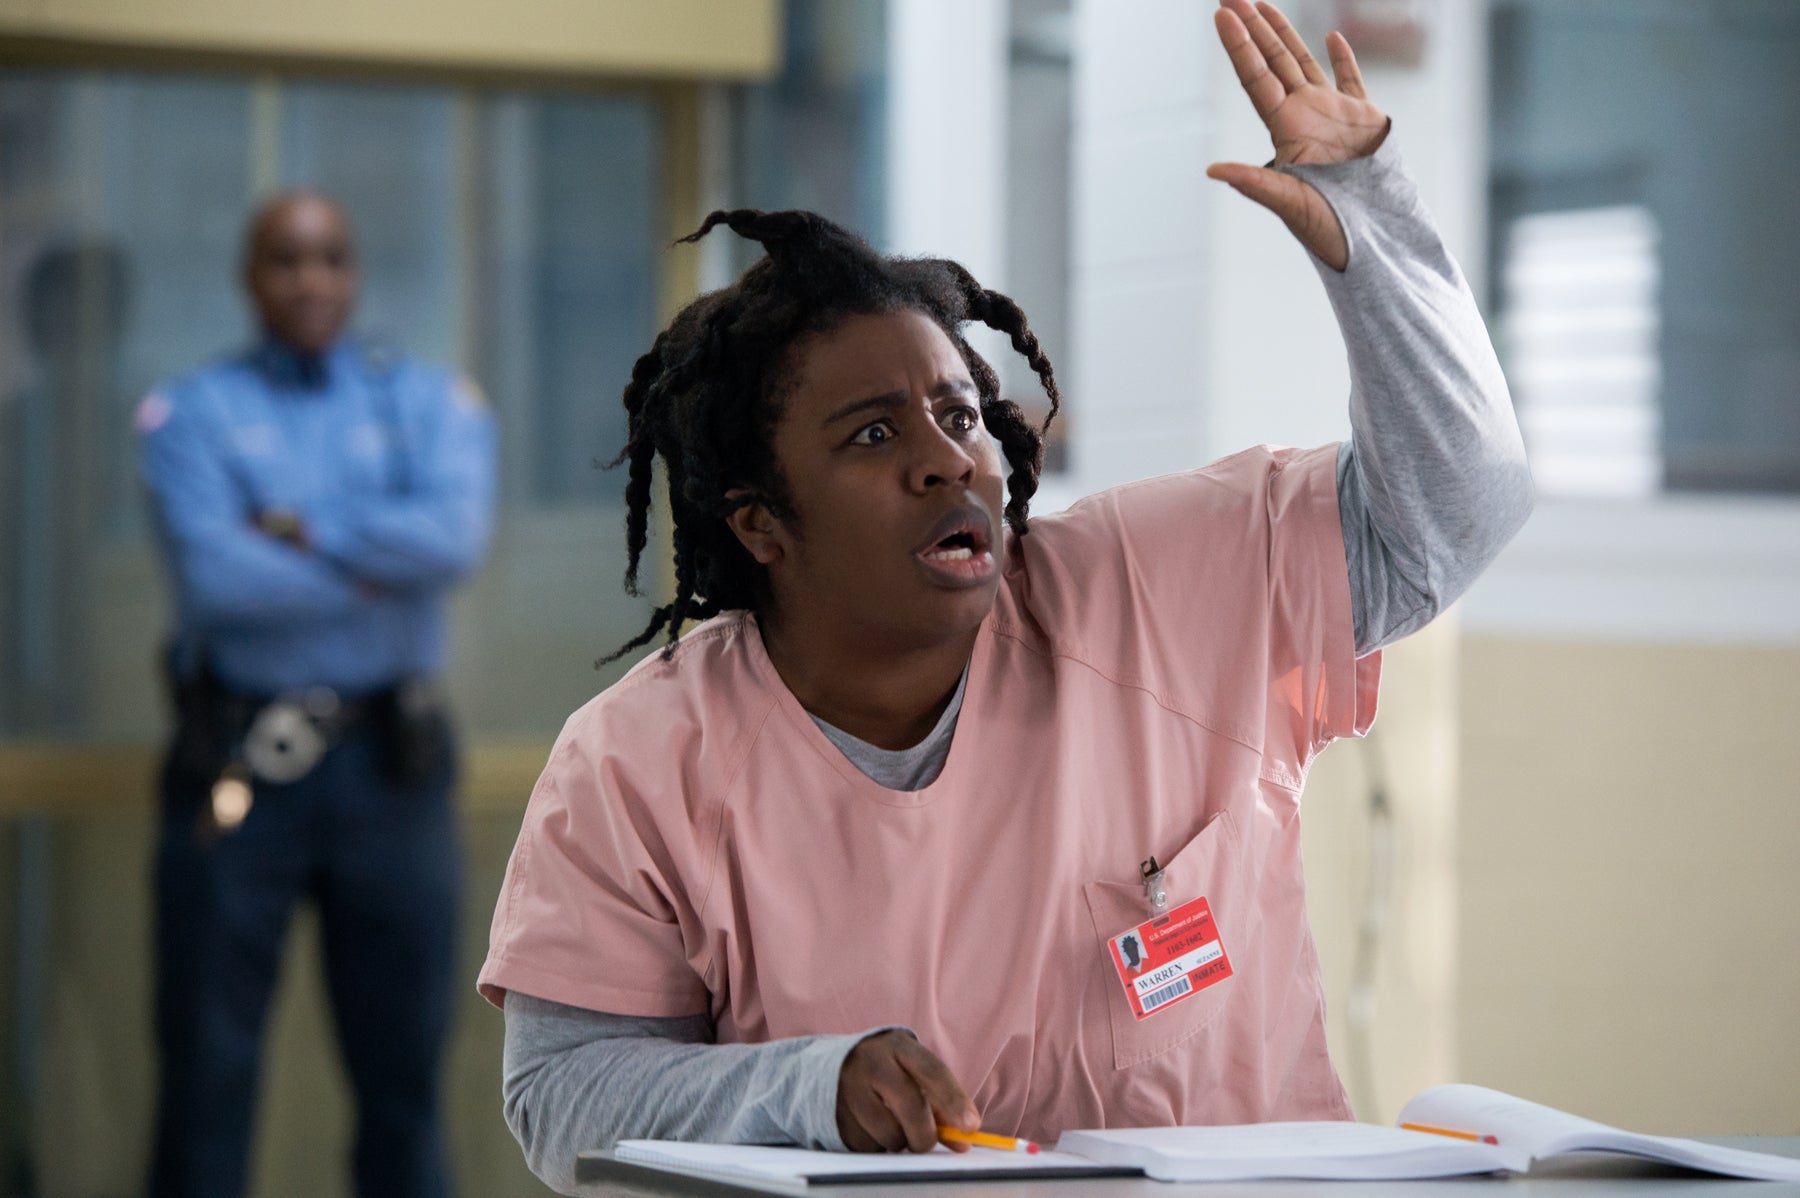 Suzanne Warren sits at a desk raising her hand while a prison guard stands in the background in an episode of Orange Is the New Black.